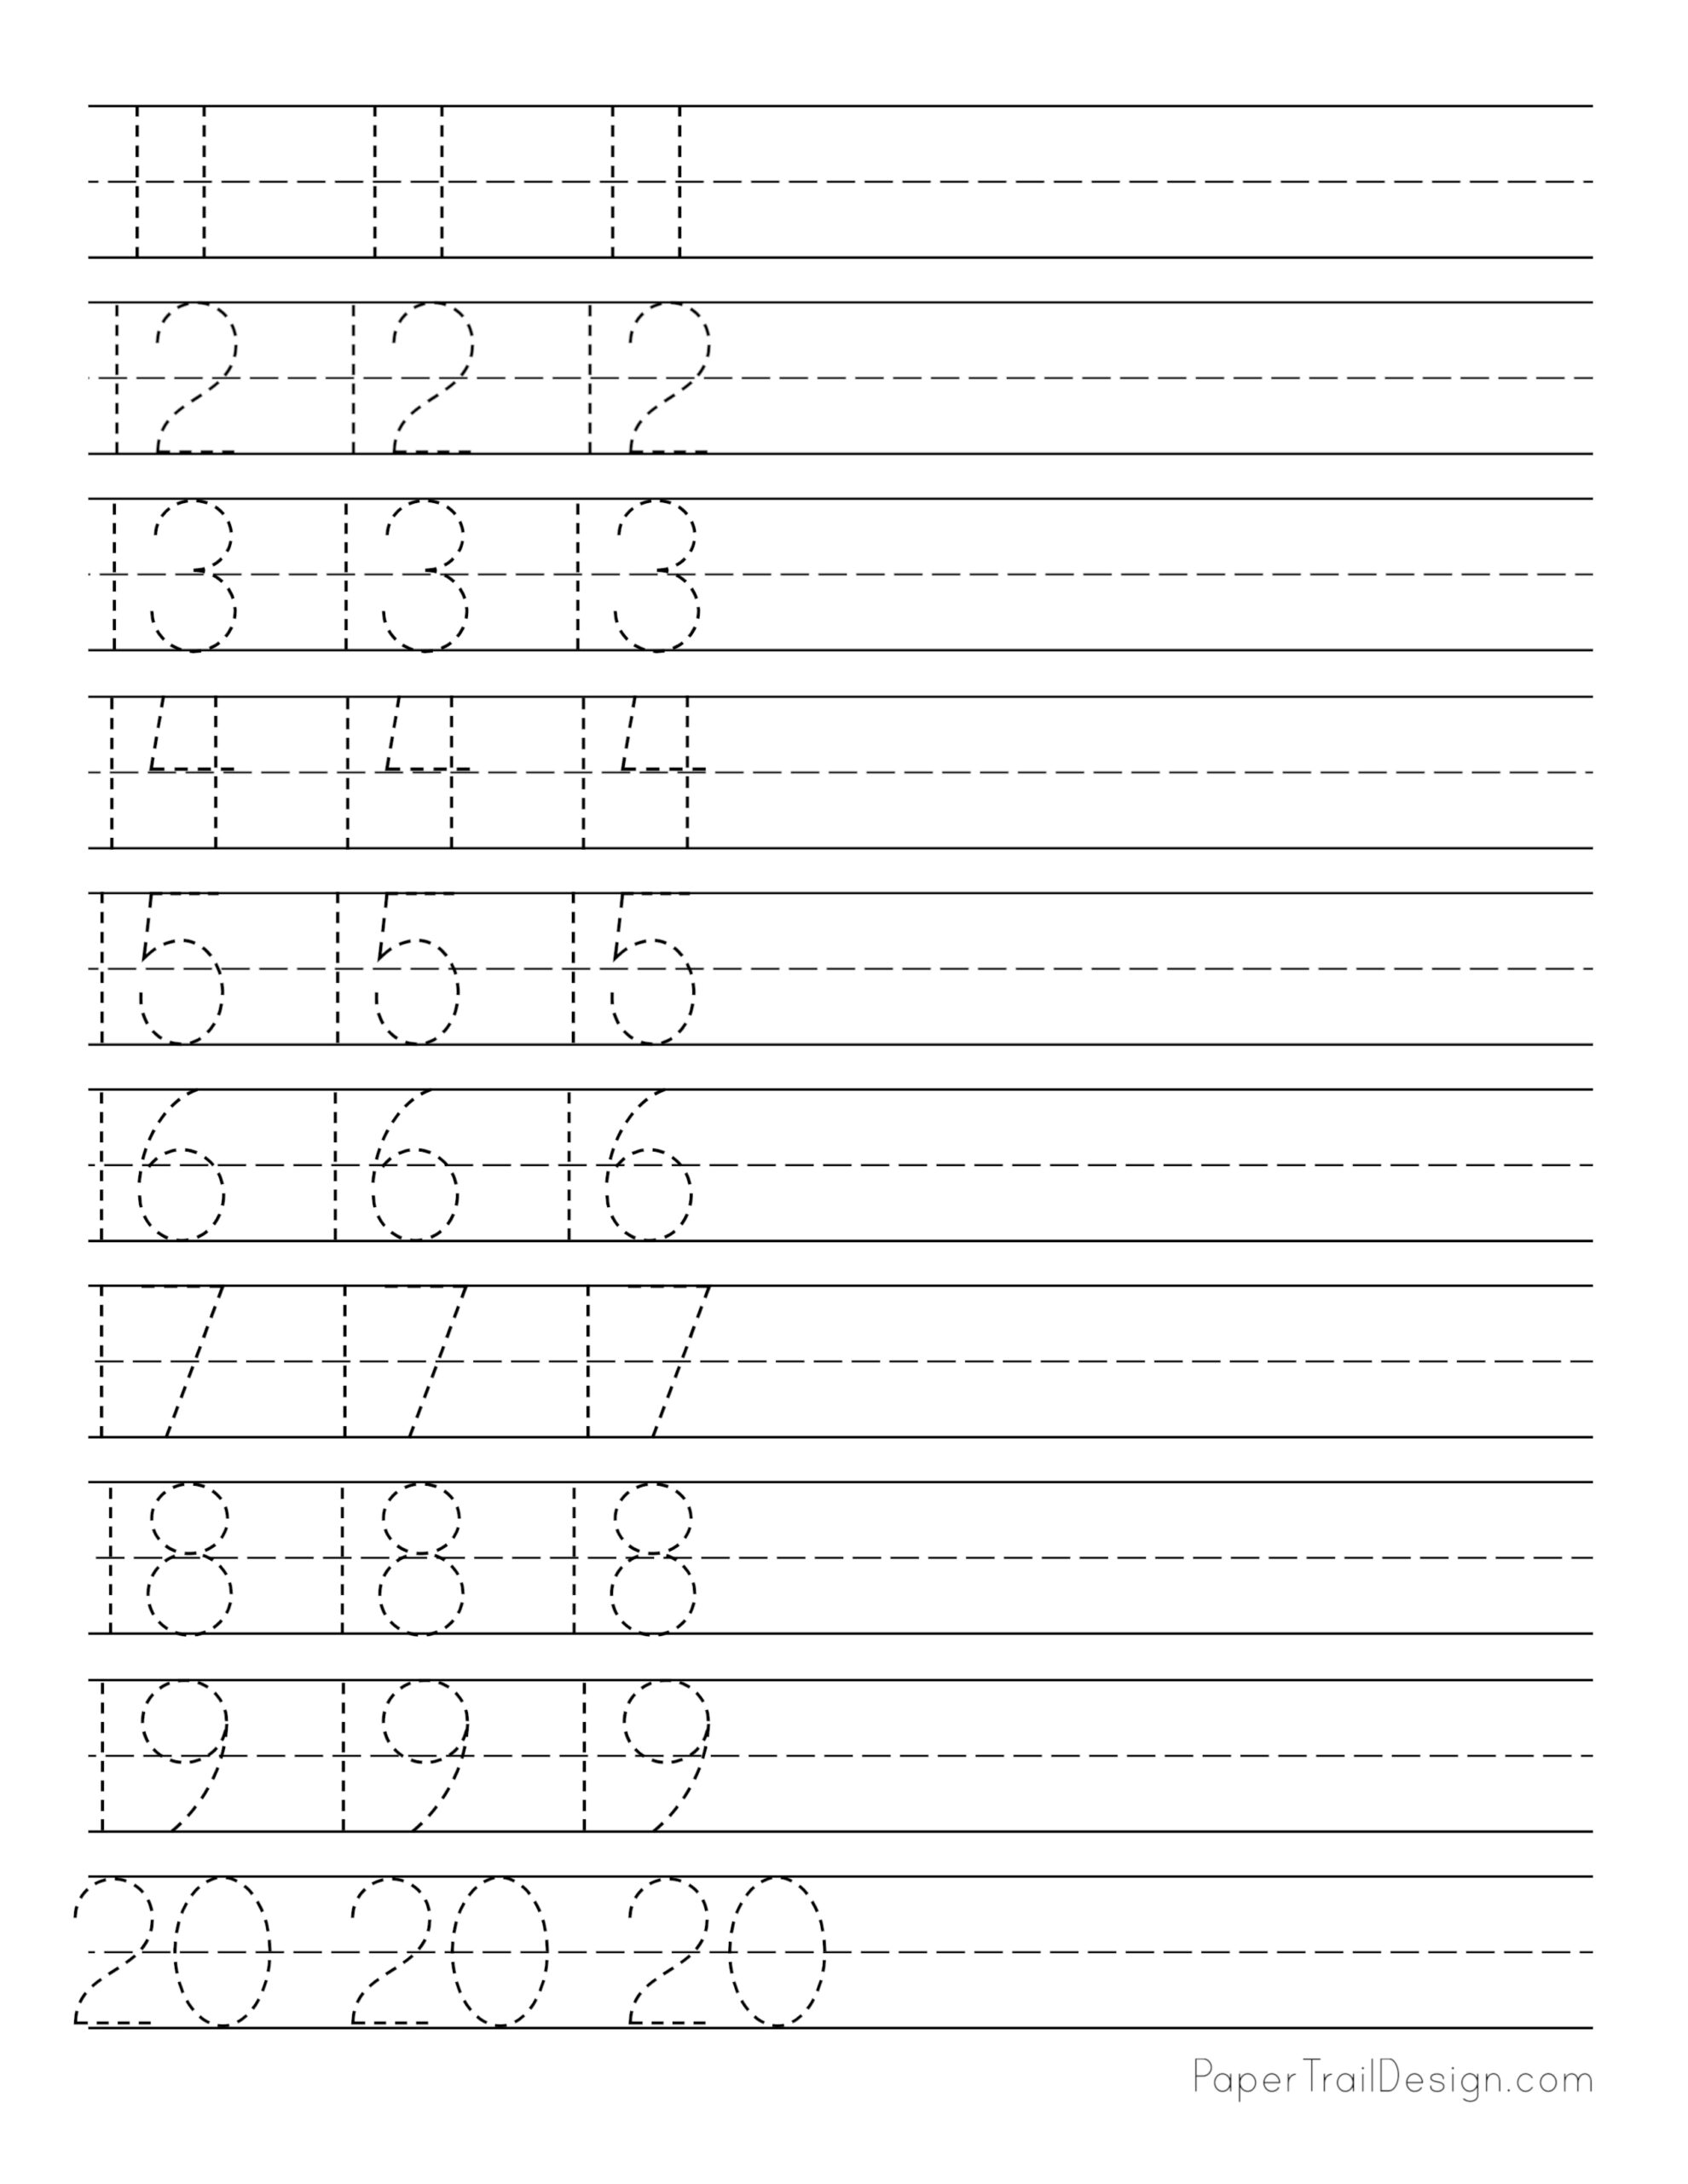 free-trace-the-numbers-11-20-worksheets-for-kids-free-printable-number-worksheets-11-20-for